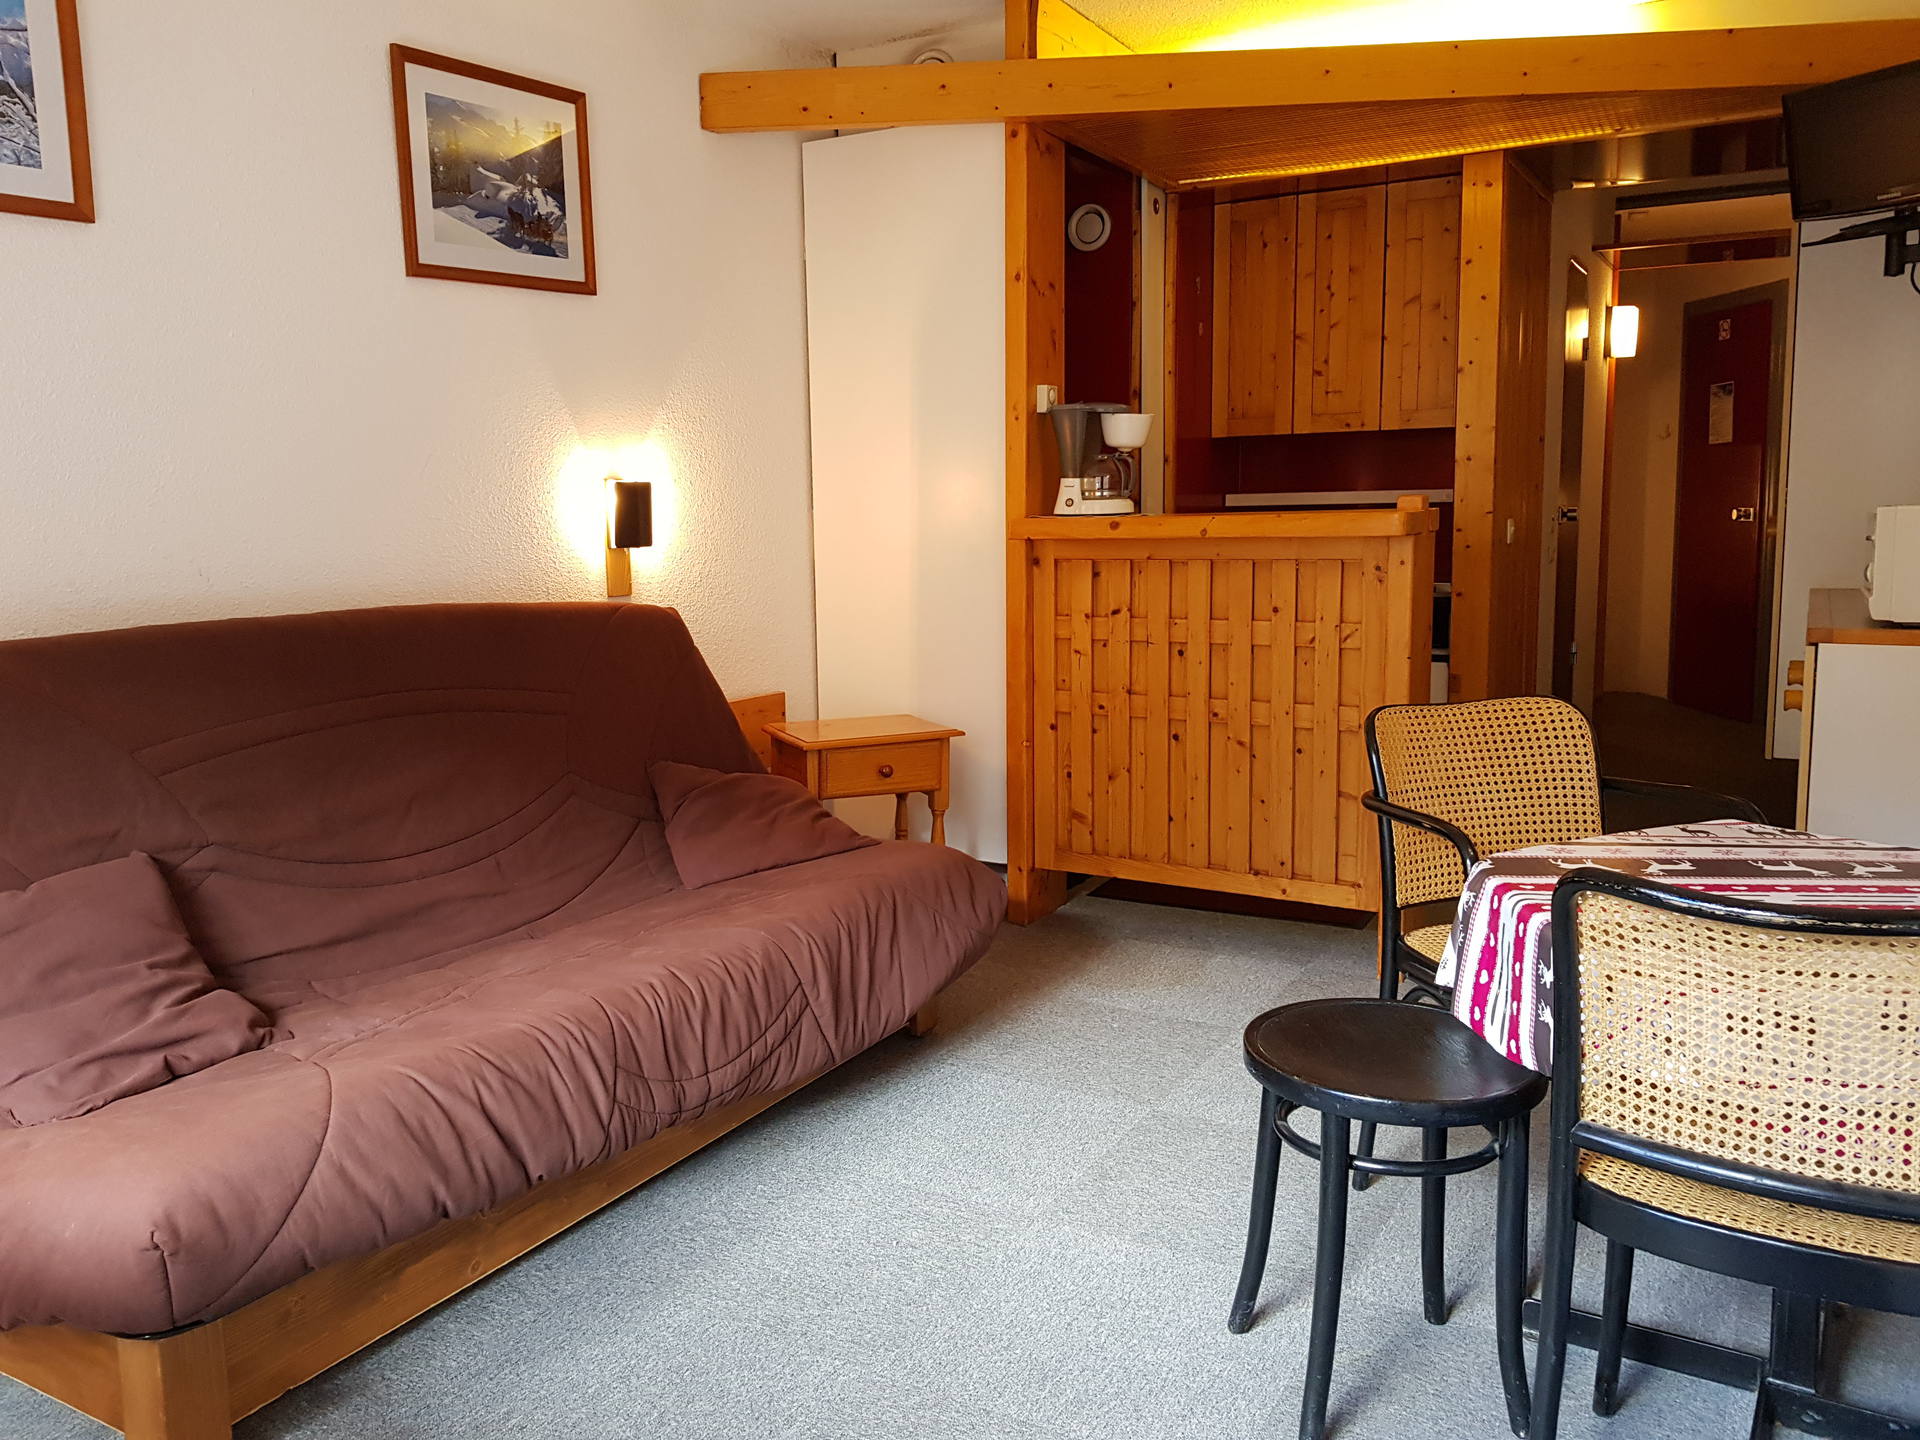 Studio 4 people - RESIDENCE HOTEL AIGUILLE ROUGE - Les Arcs 2000